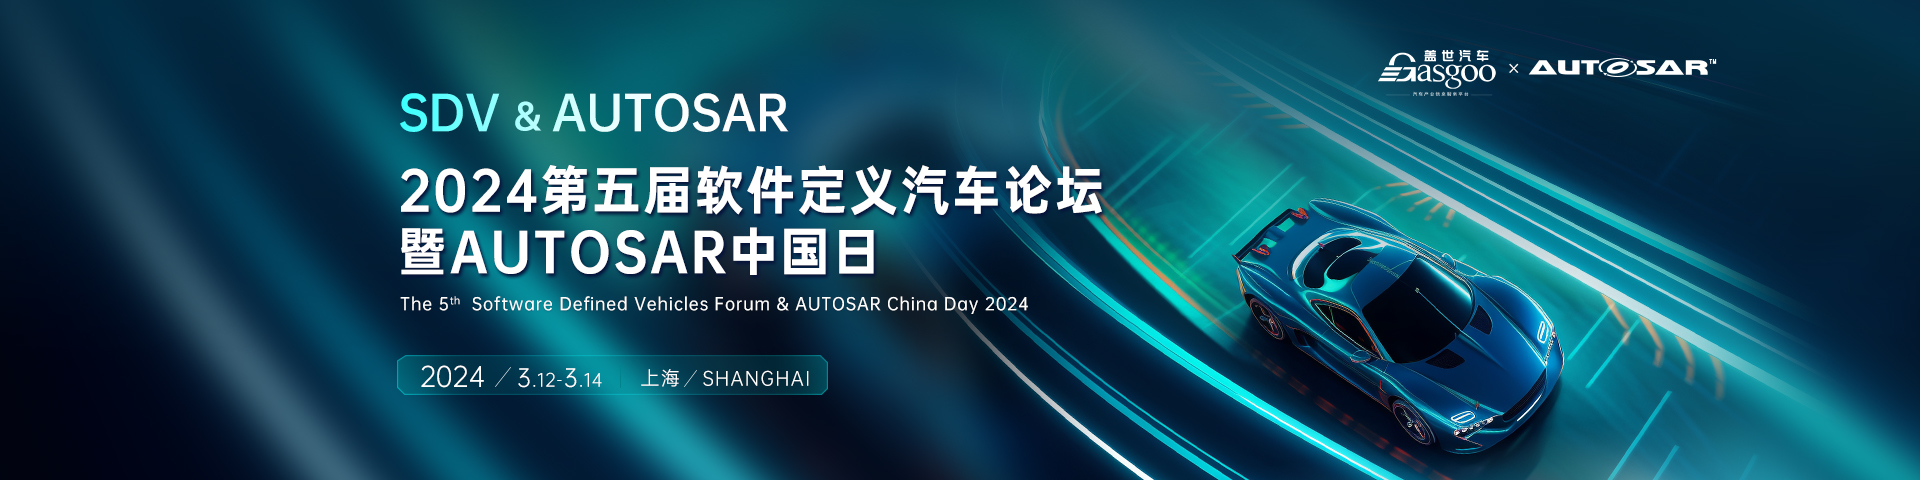 The 5th Software Defined Vehicles Forum & AUTOSAR China Day 2024